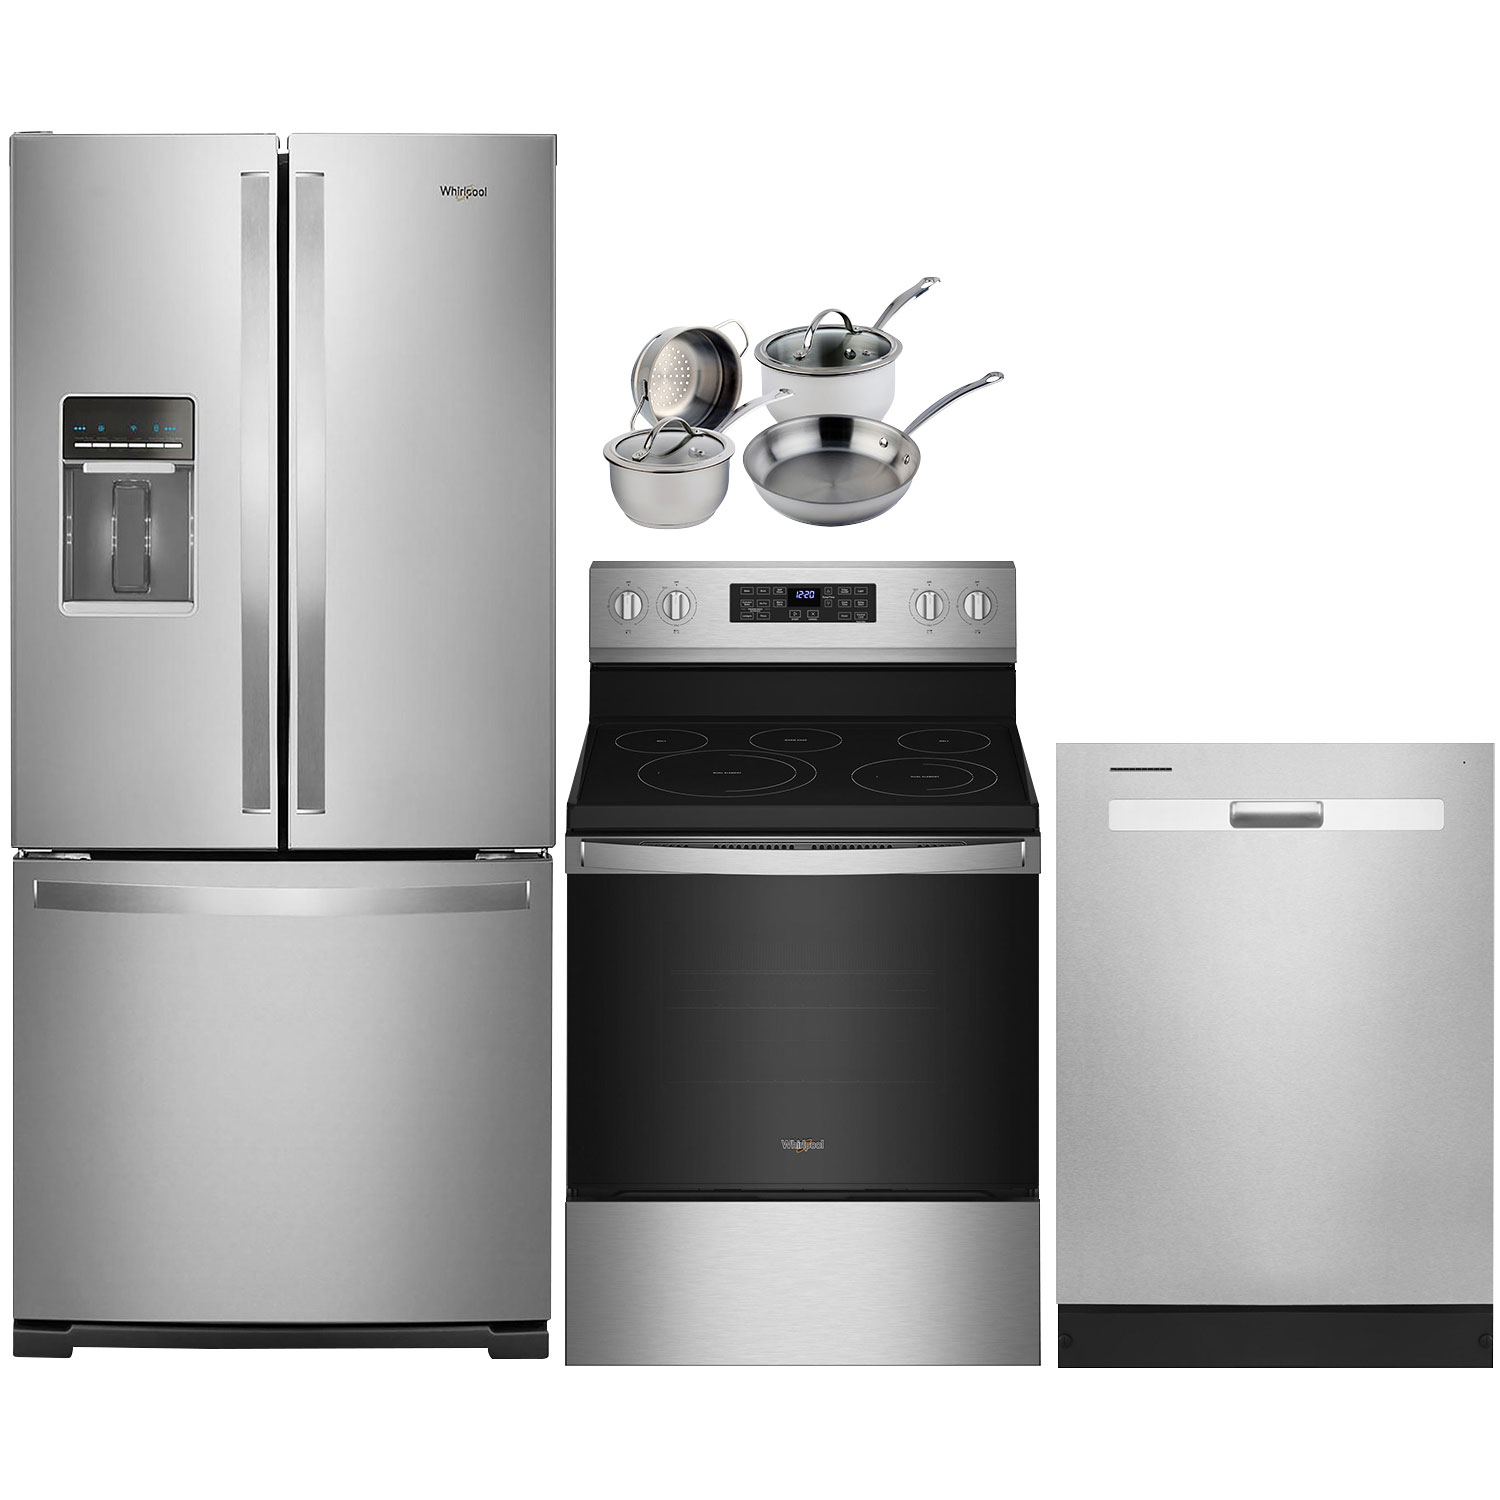 Whirlpool 30" French Door Refrigerator; Electric Air Fry Range; Dishwasher; Cookware Set- Stainless